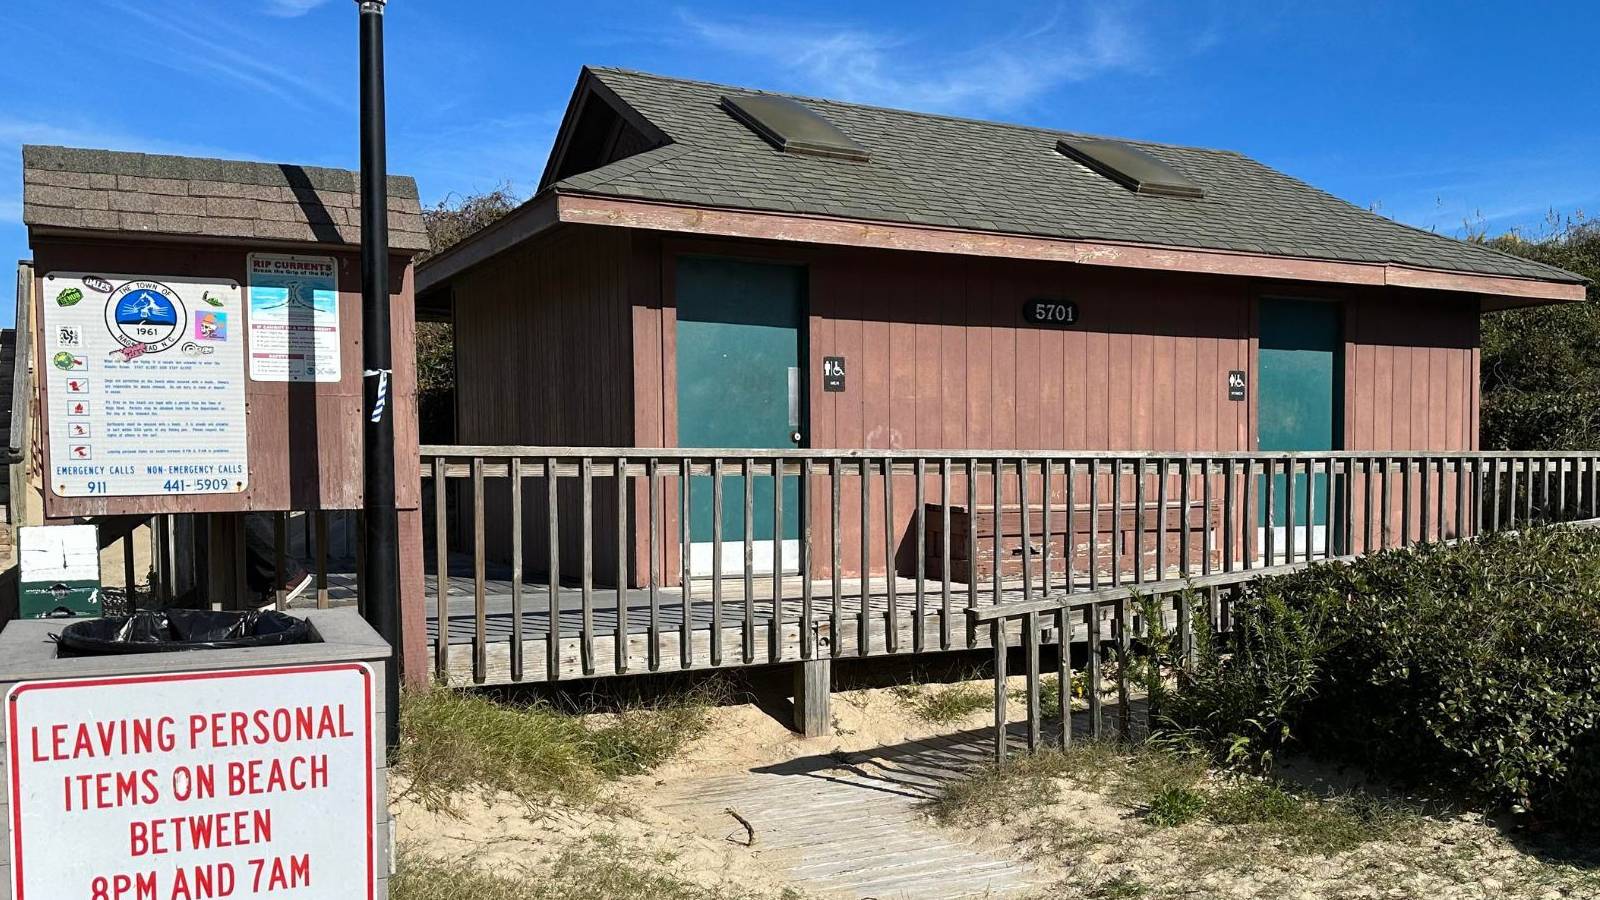 Construction begins to replace Epstein Street bathhouse in Nags Head